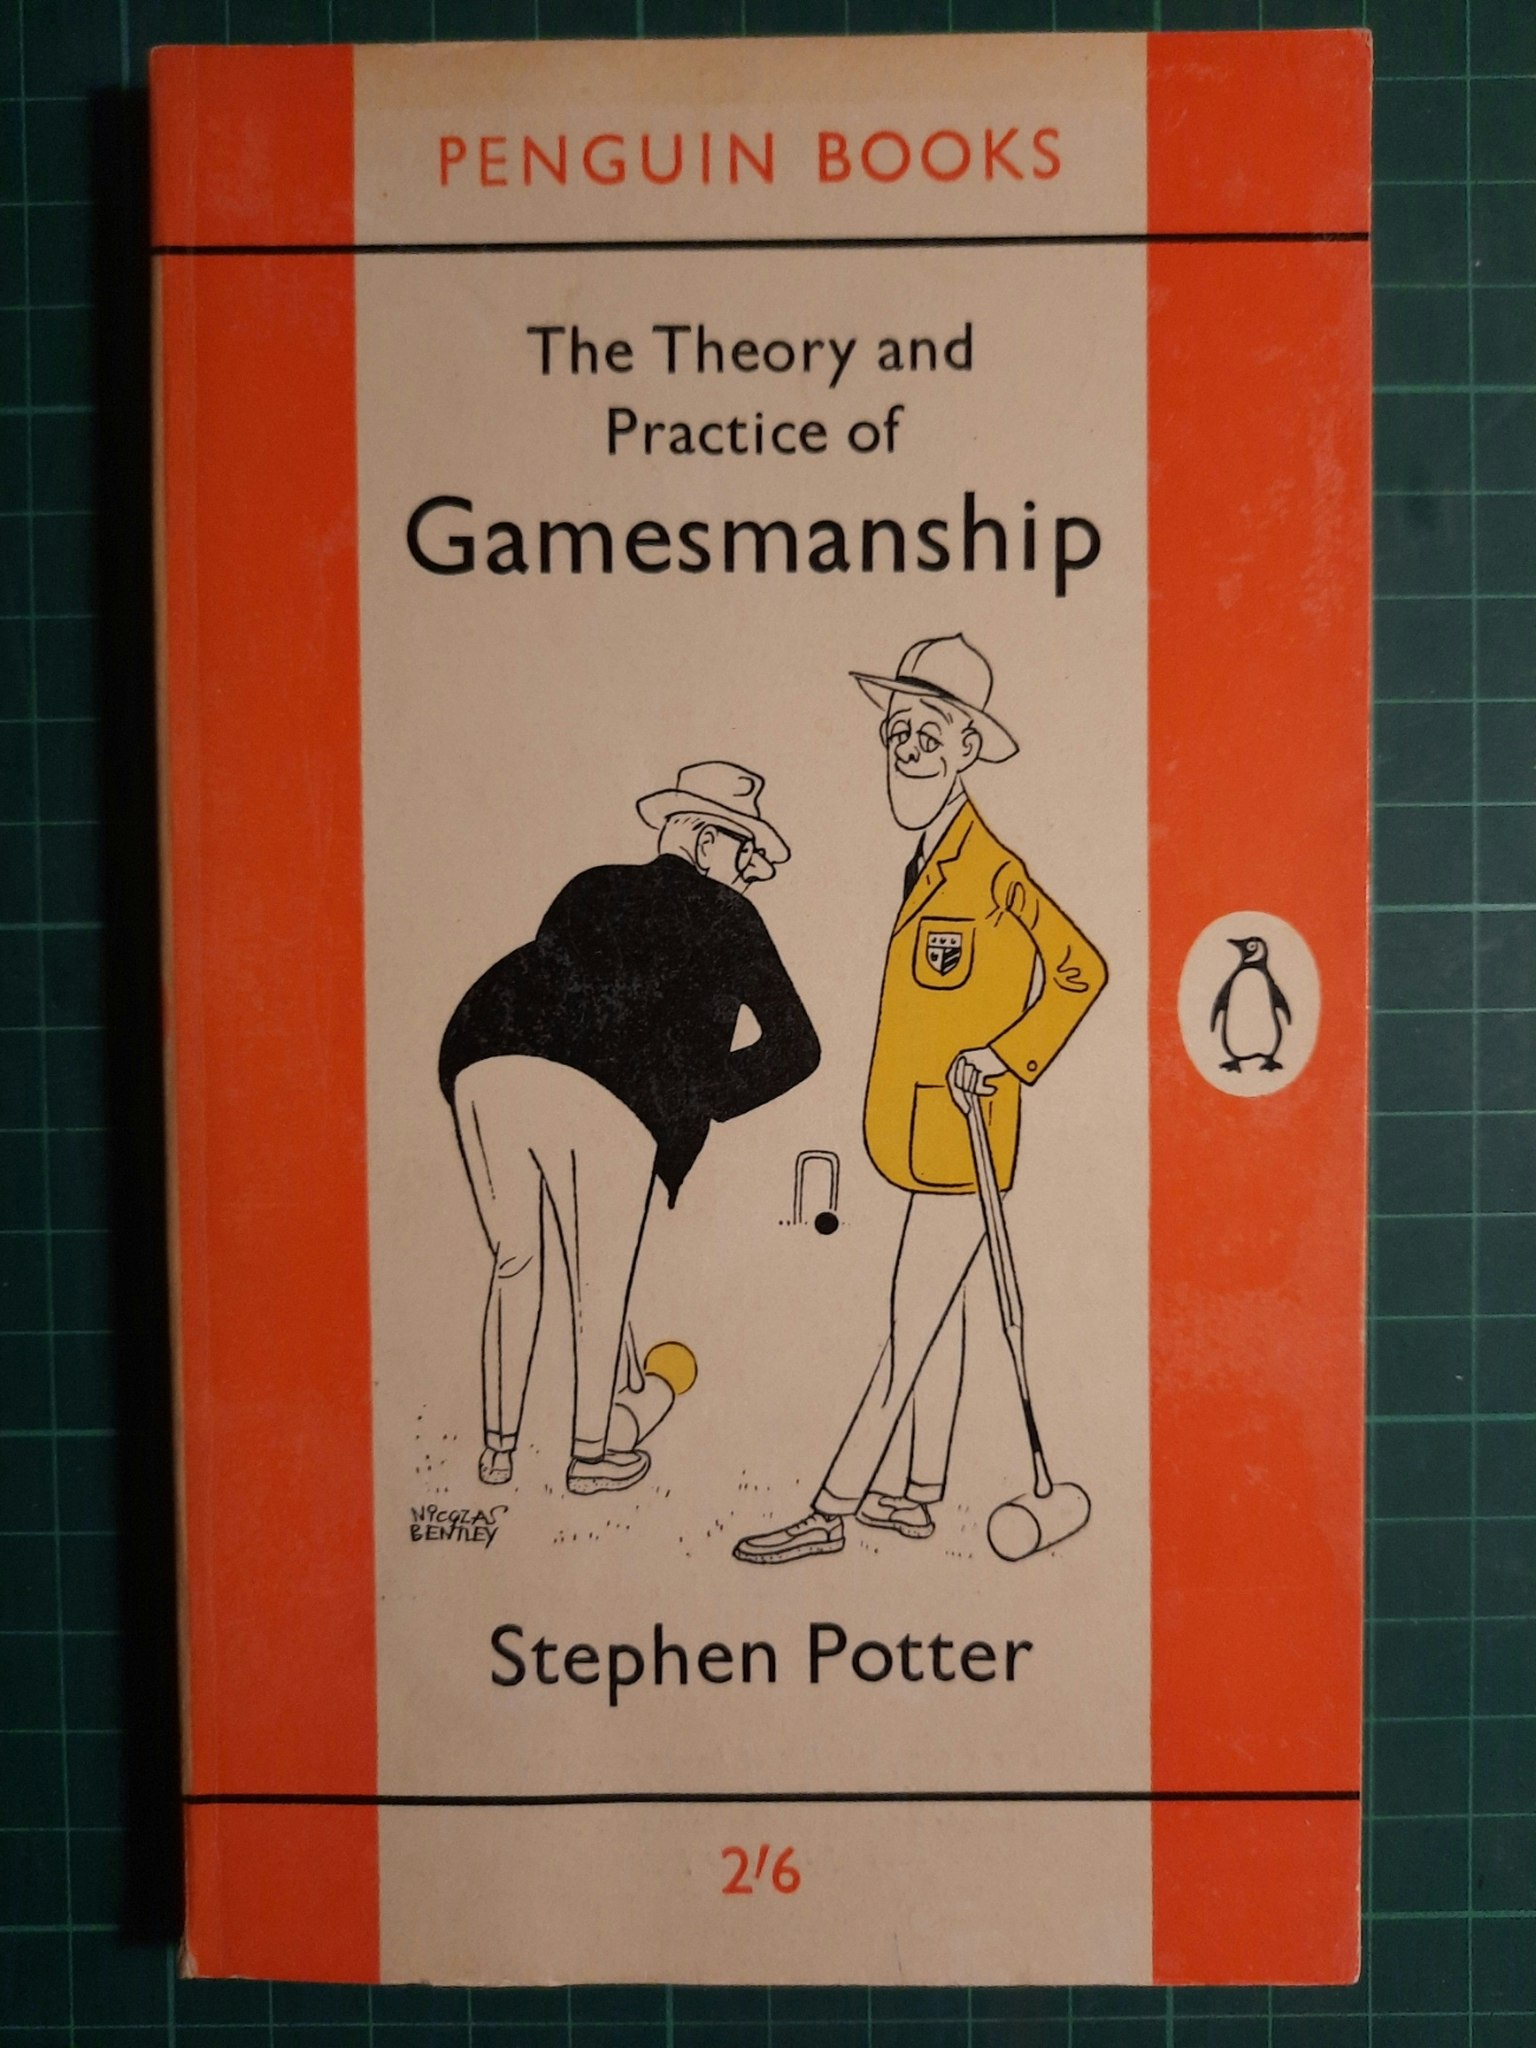 The theory and practice og gamemanship